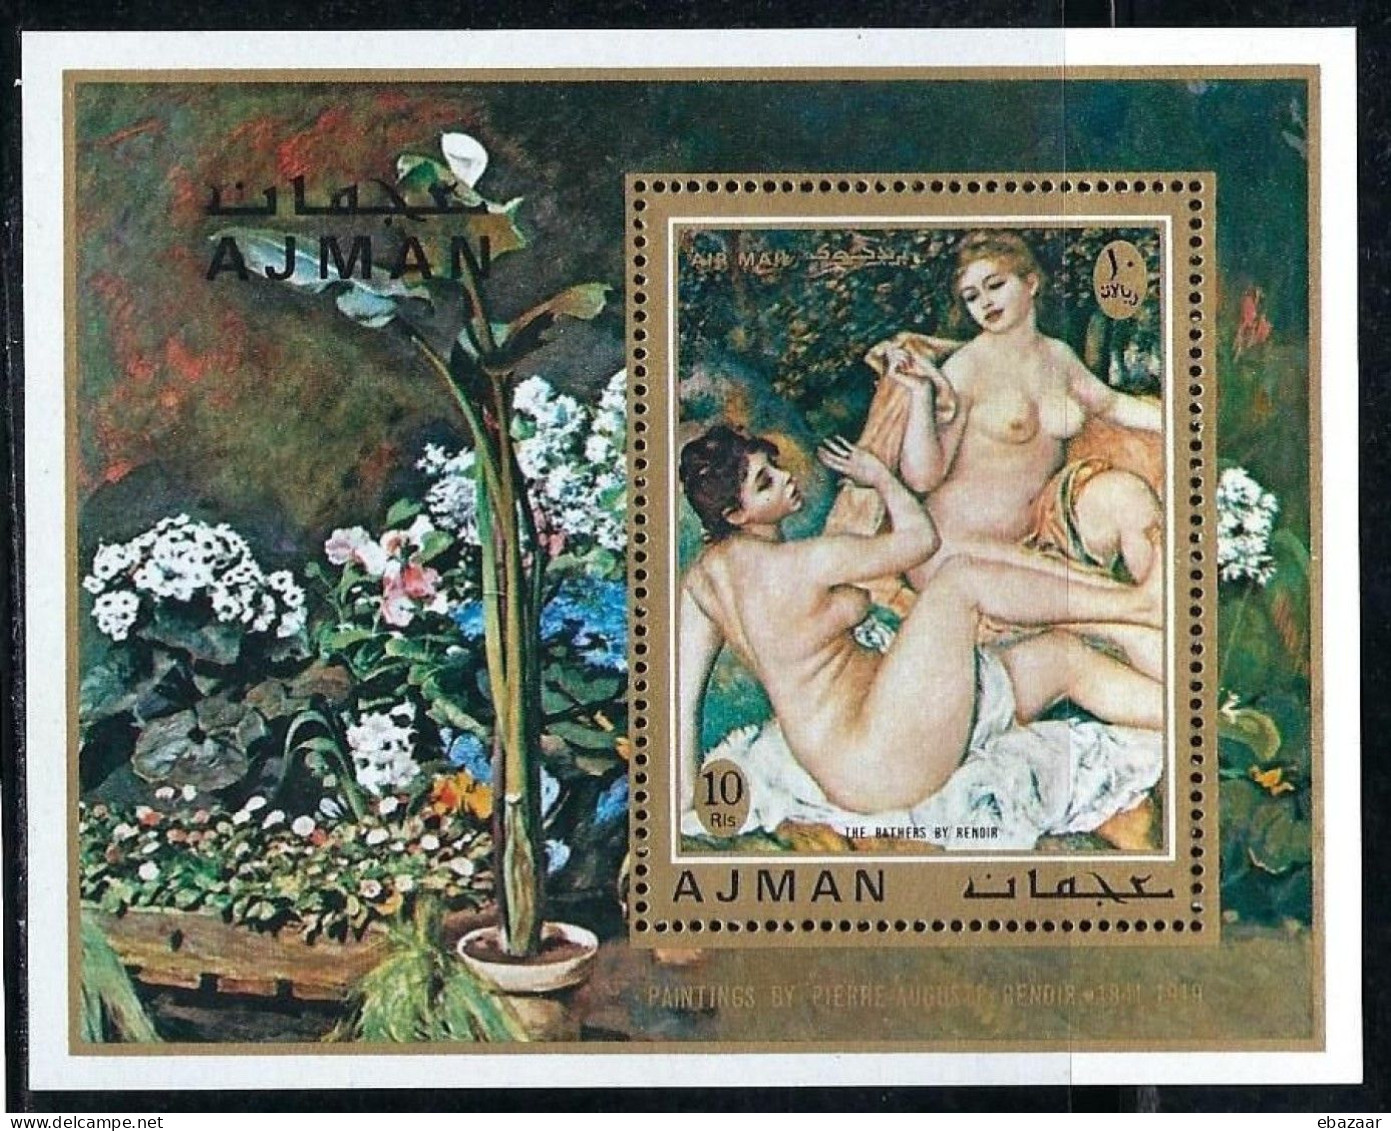 Ajman 1971 Airmail - French Impressionist Auguste Renoir - Nude Paintings Stamps MNH - Adschman